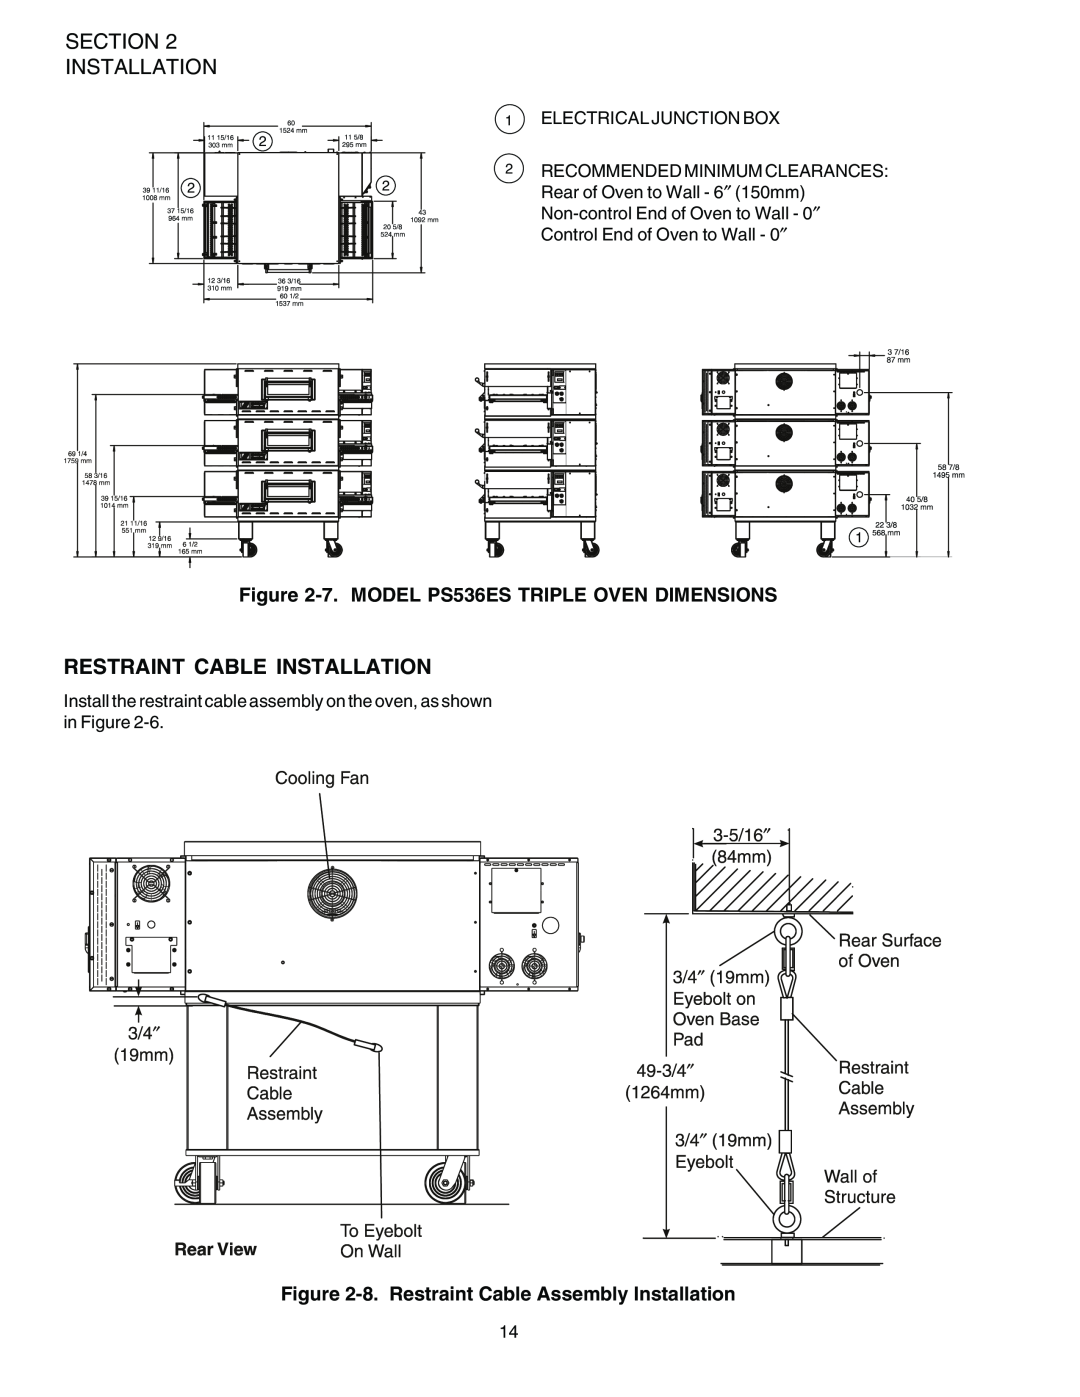 Middleby Marshall installation manual Restraint Cable Installation, 7. MODEL PS536ES TRIPLE OVEN DIMENSIONS 